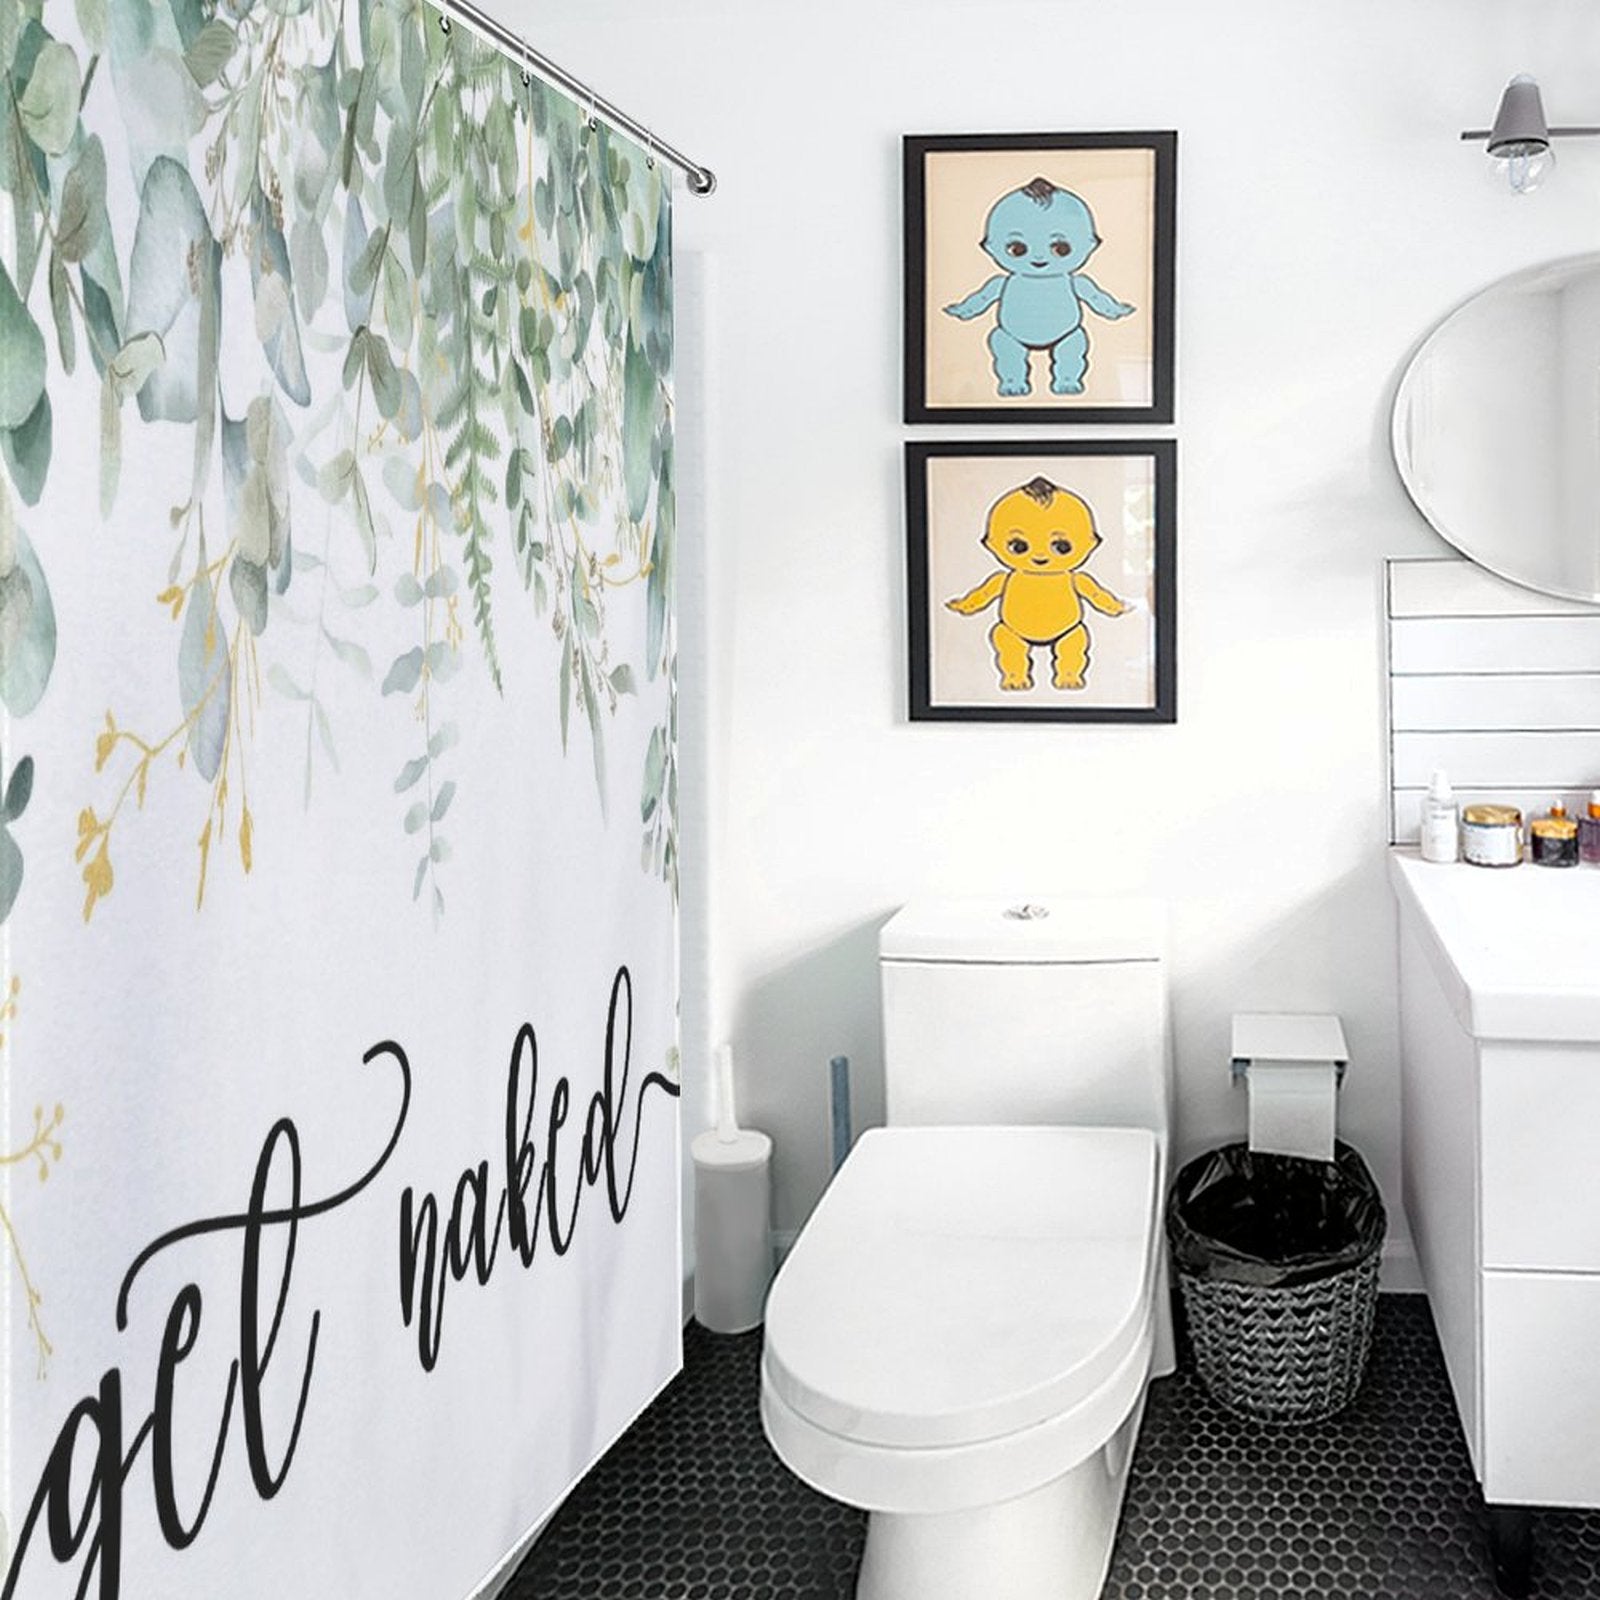 A bathroom with a **Cotton Cat Get Naked Funny Letters Eucalyptus Leaves Print Shower Curtain-Cottoncat** featuring eucalyptus leaves print and "Get Naked" text, alongside a modern toilet, a vanity with a sink, and two framed animal artworks on the wall.